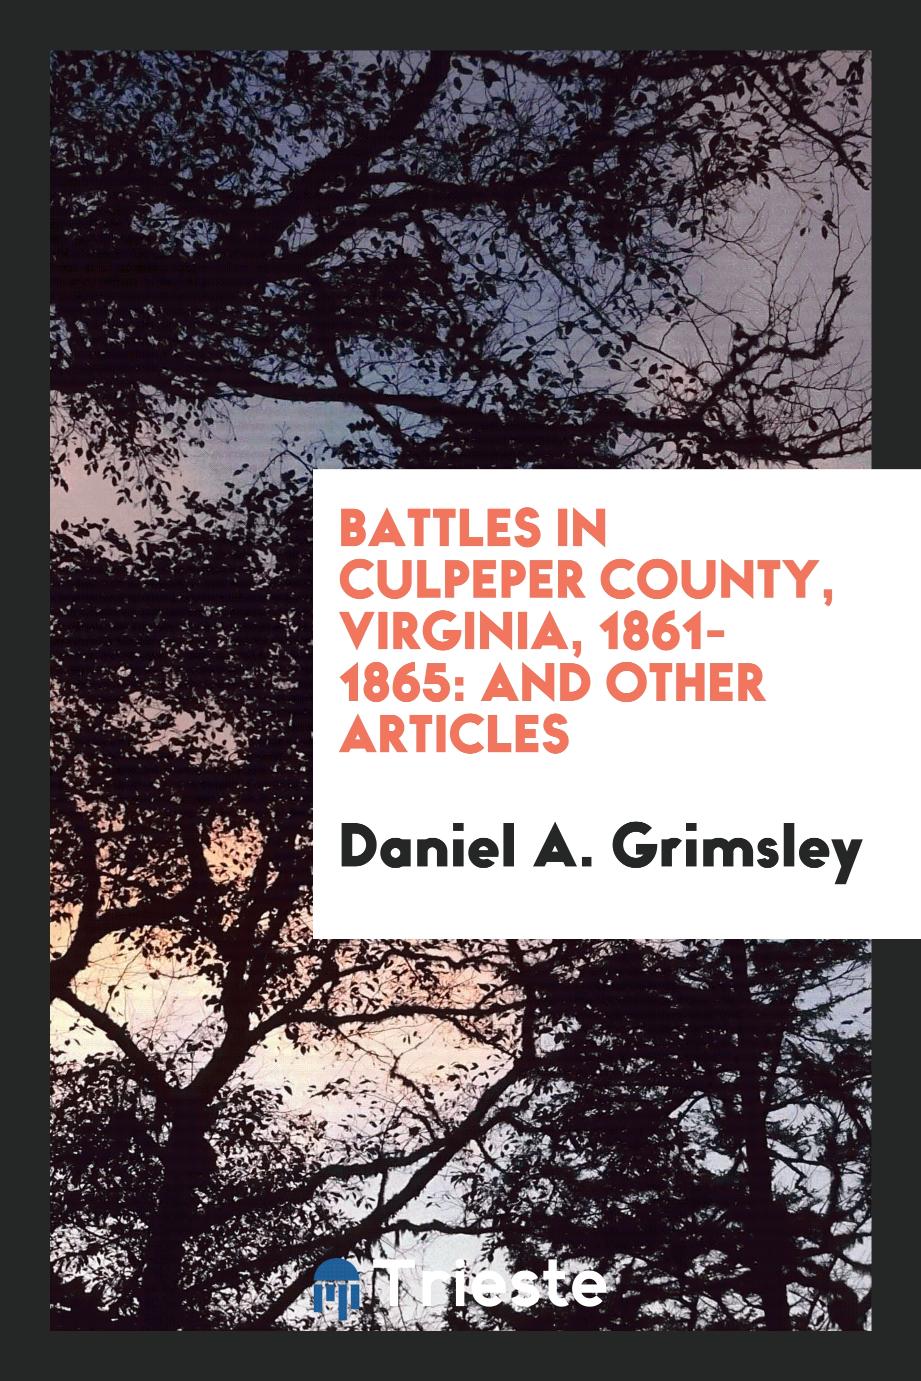 Battles in Culpeper County, Virginia, 1861-1865: And Other Articles